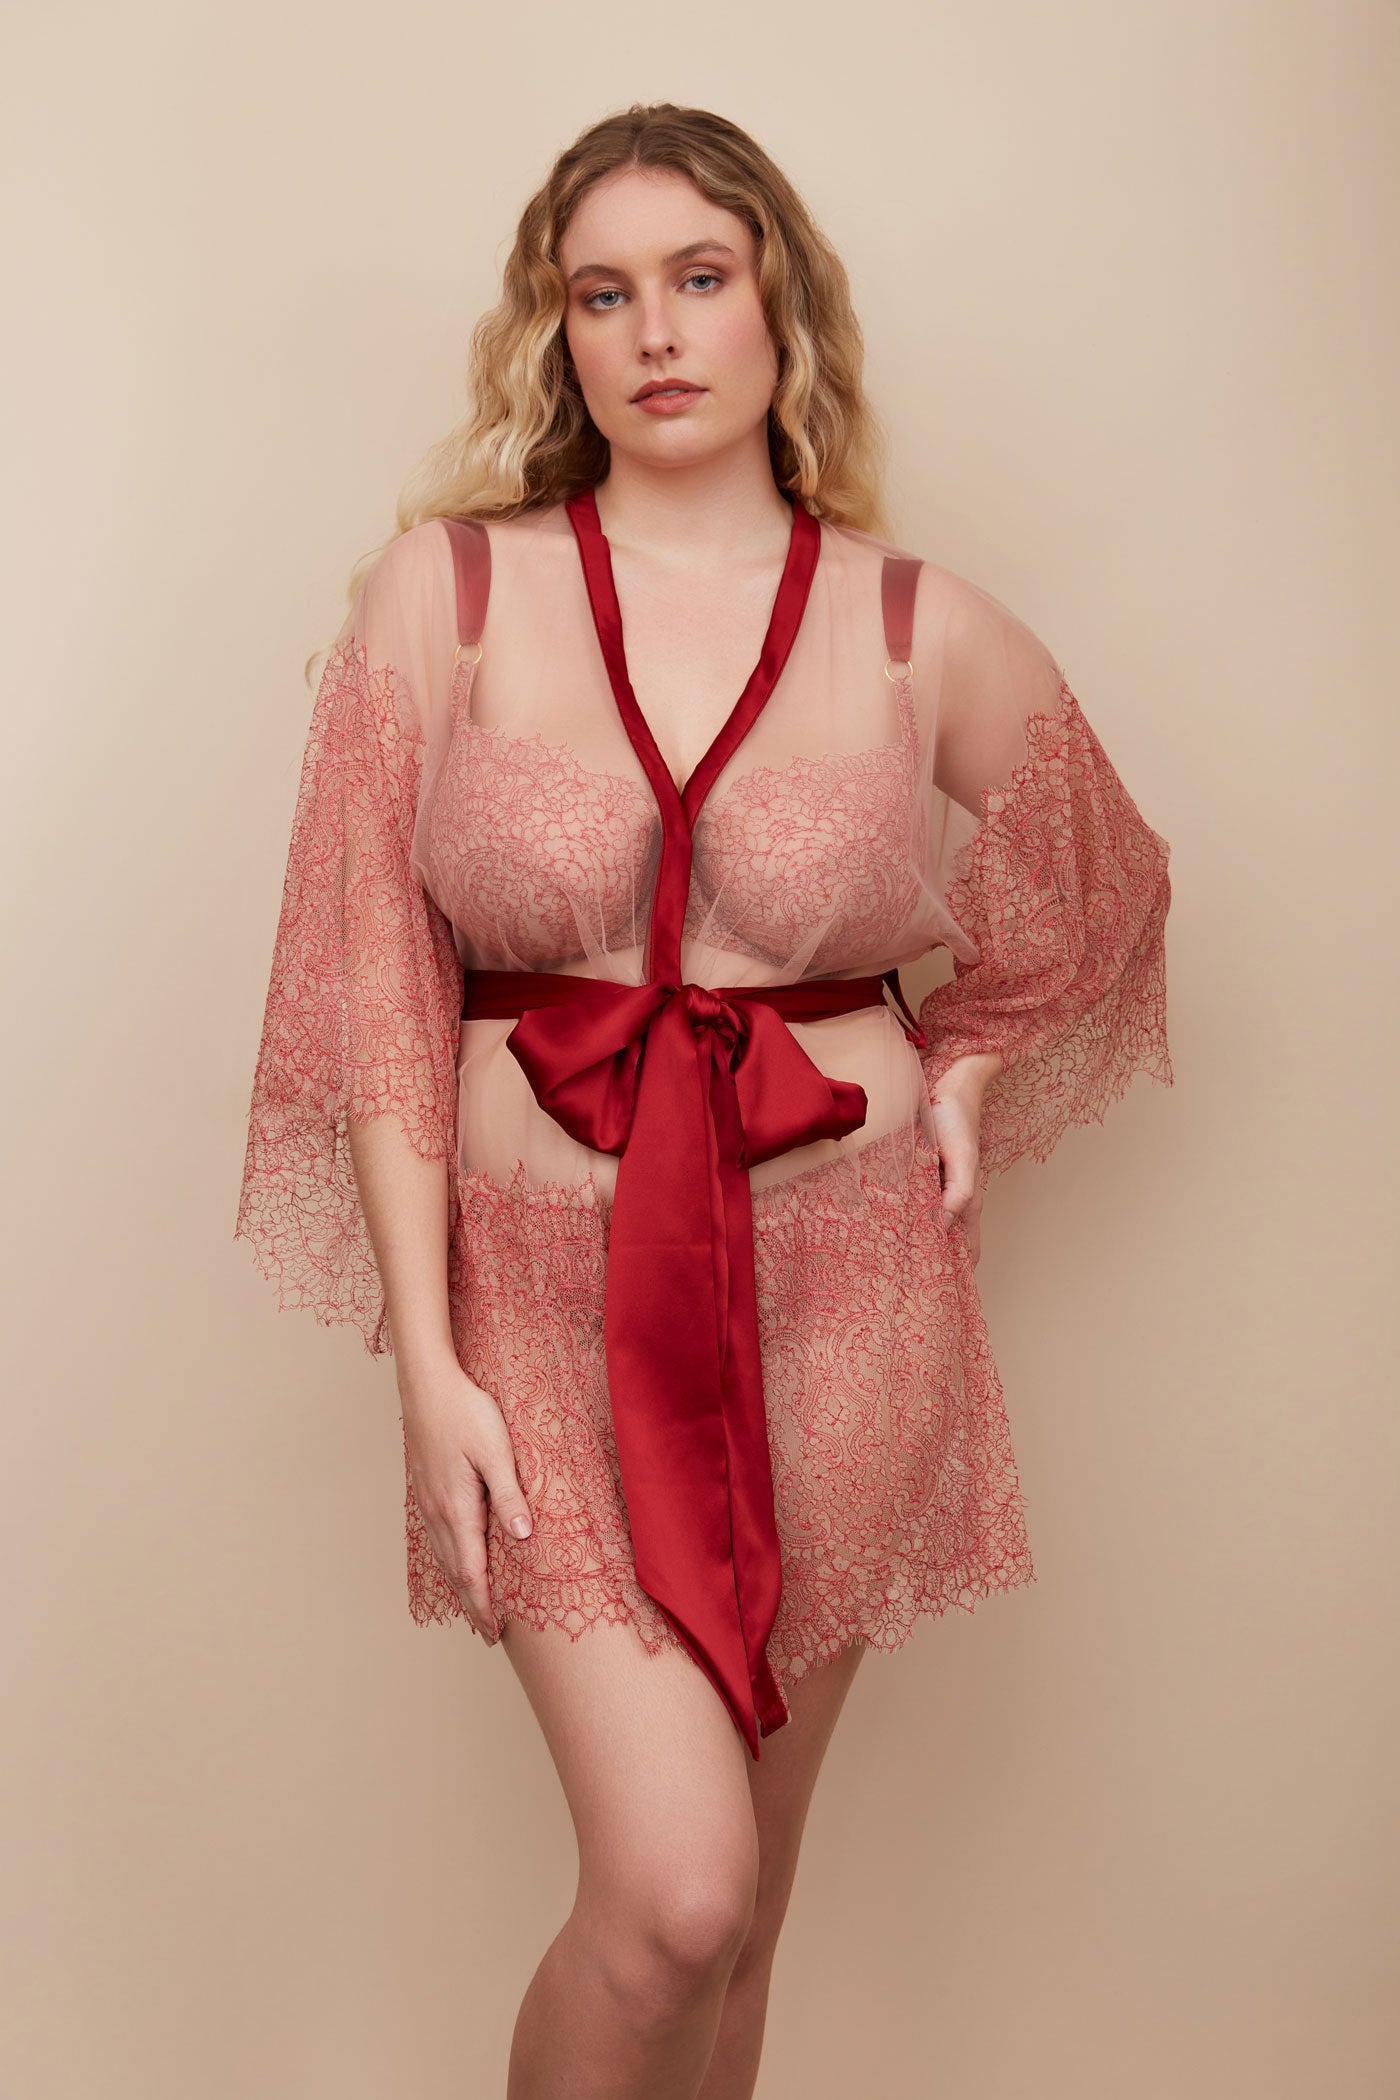 Luxury sheer robe in red lace with silk binding and red silk sash tied in bow